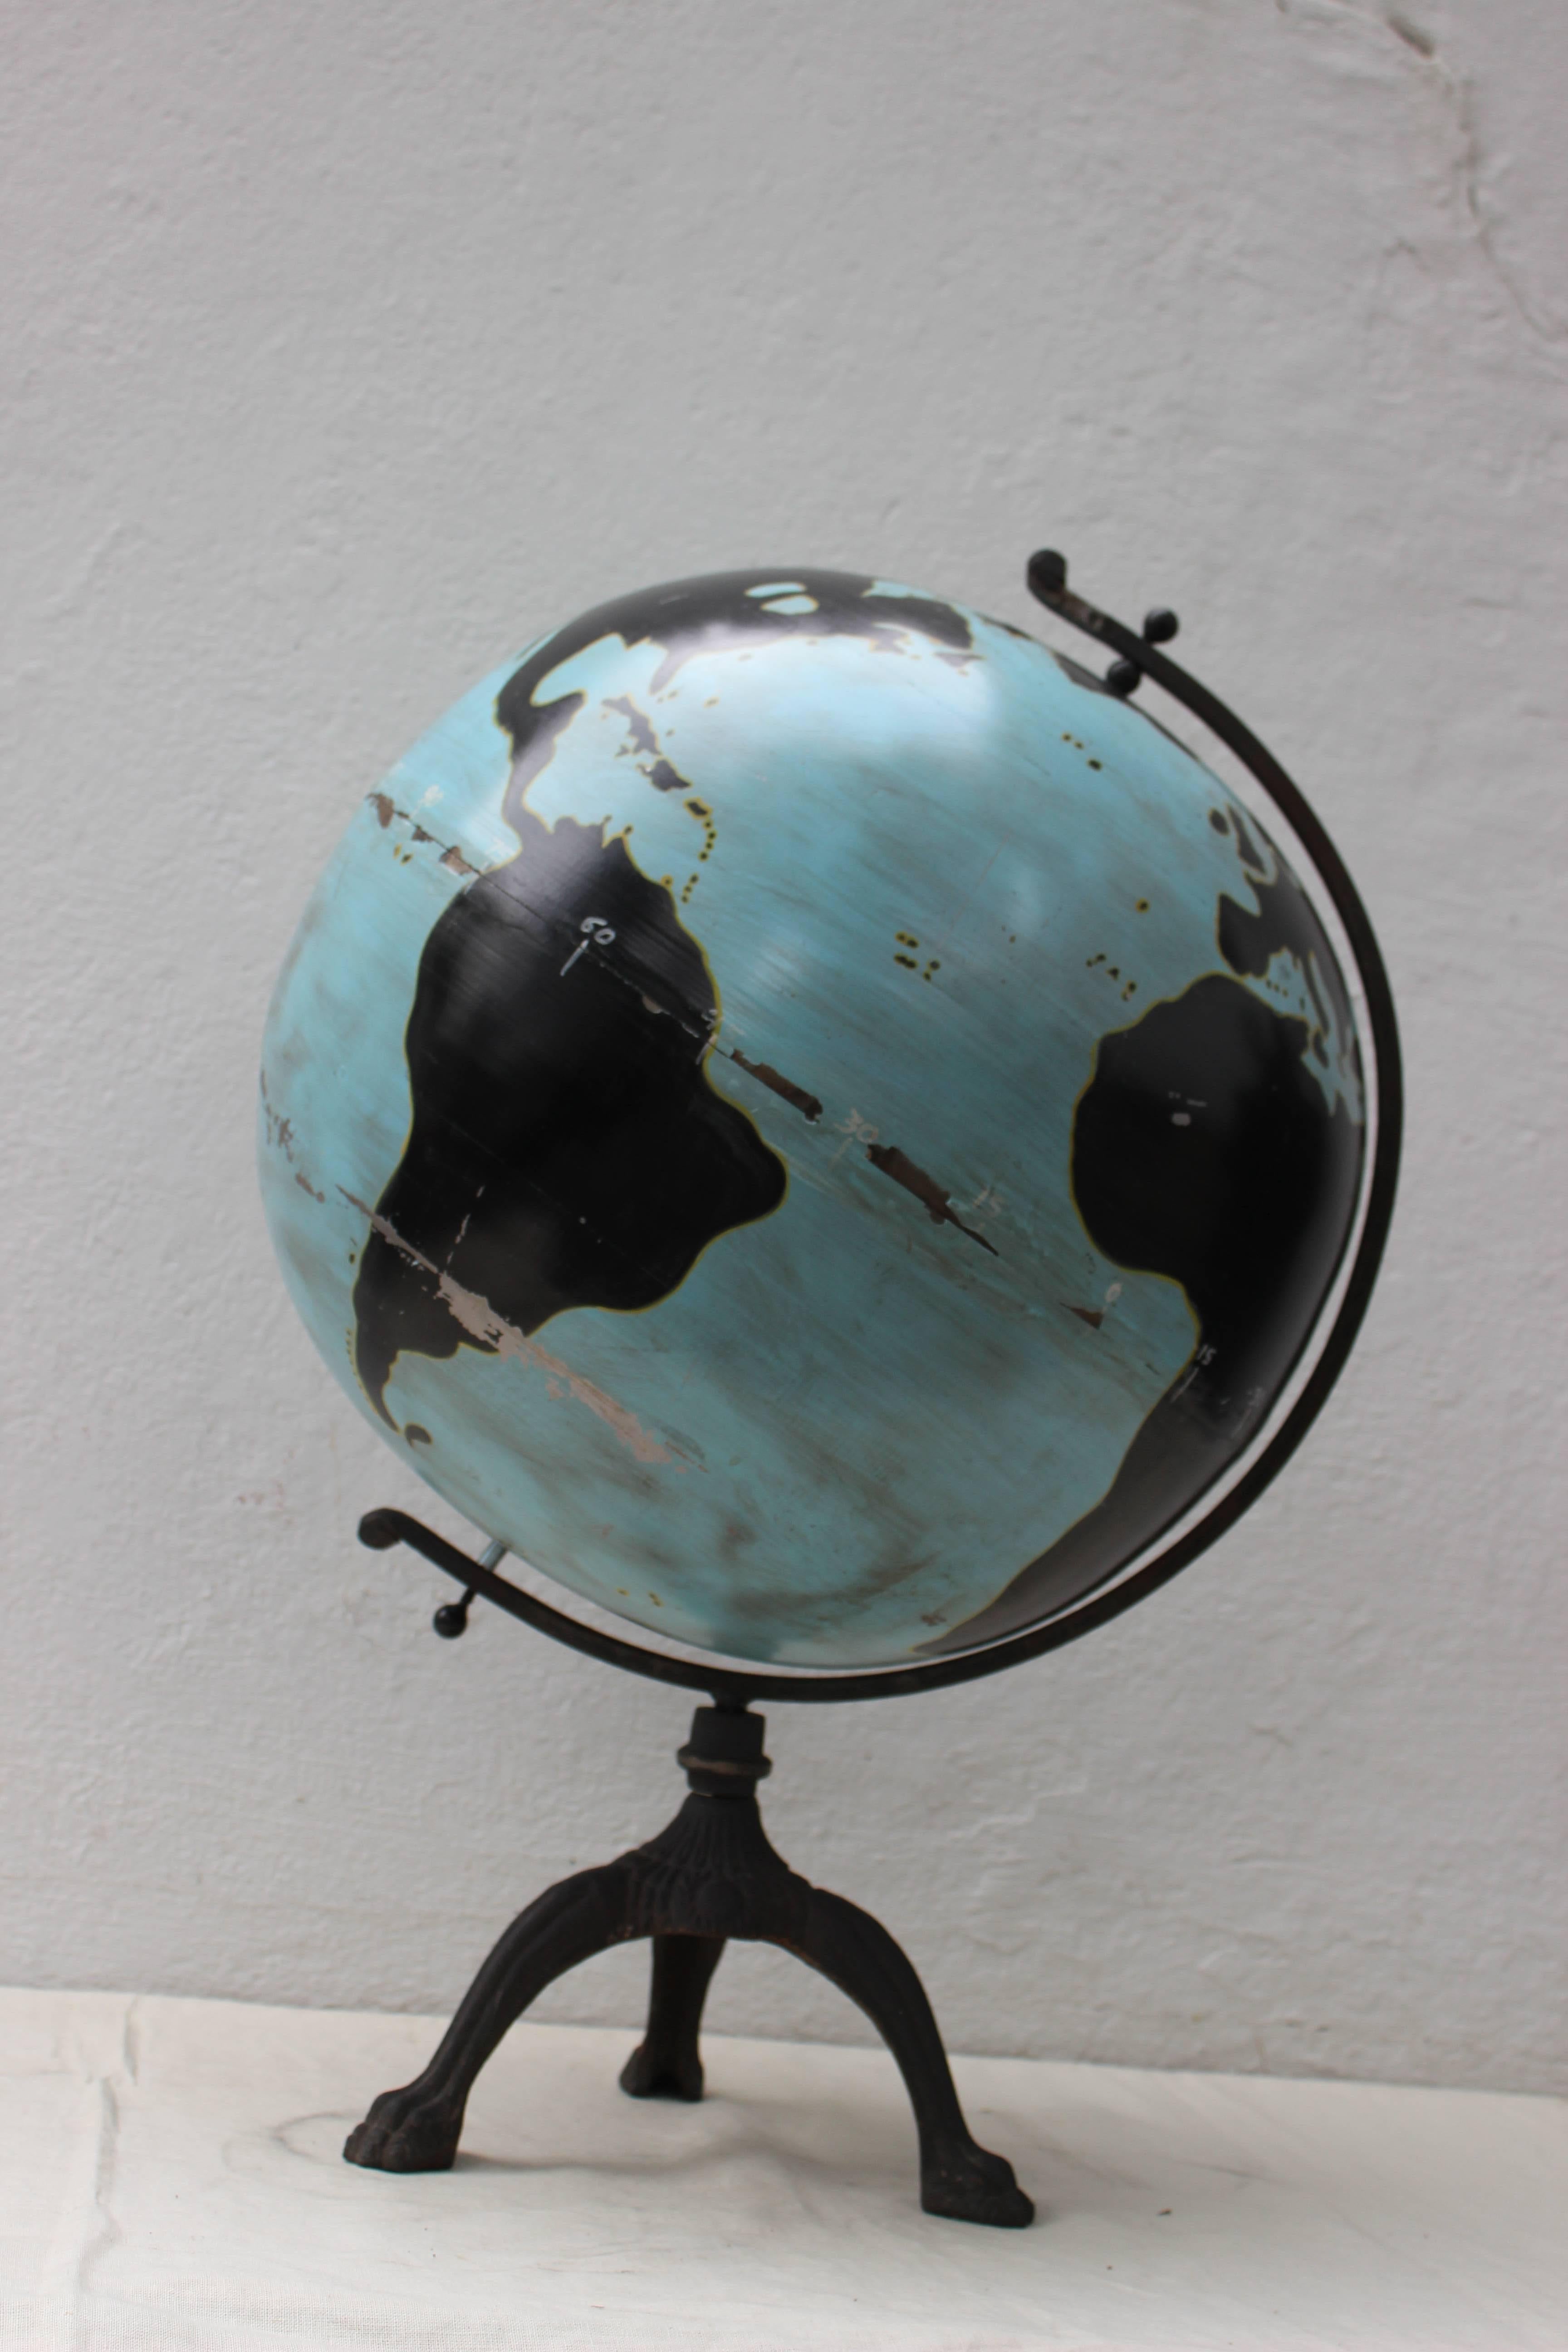 Wonderful and unusual painted metal globe of great scale... blue with black continents on an iron base. Minor paint chips and bent in the bottom area of the globe.